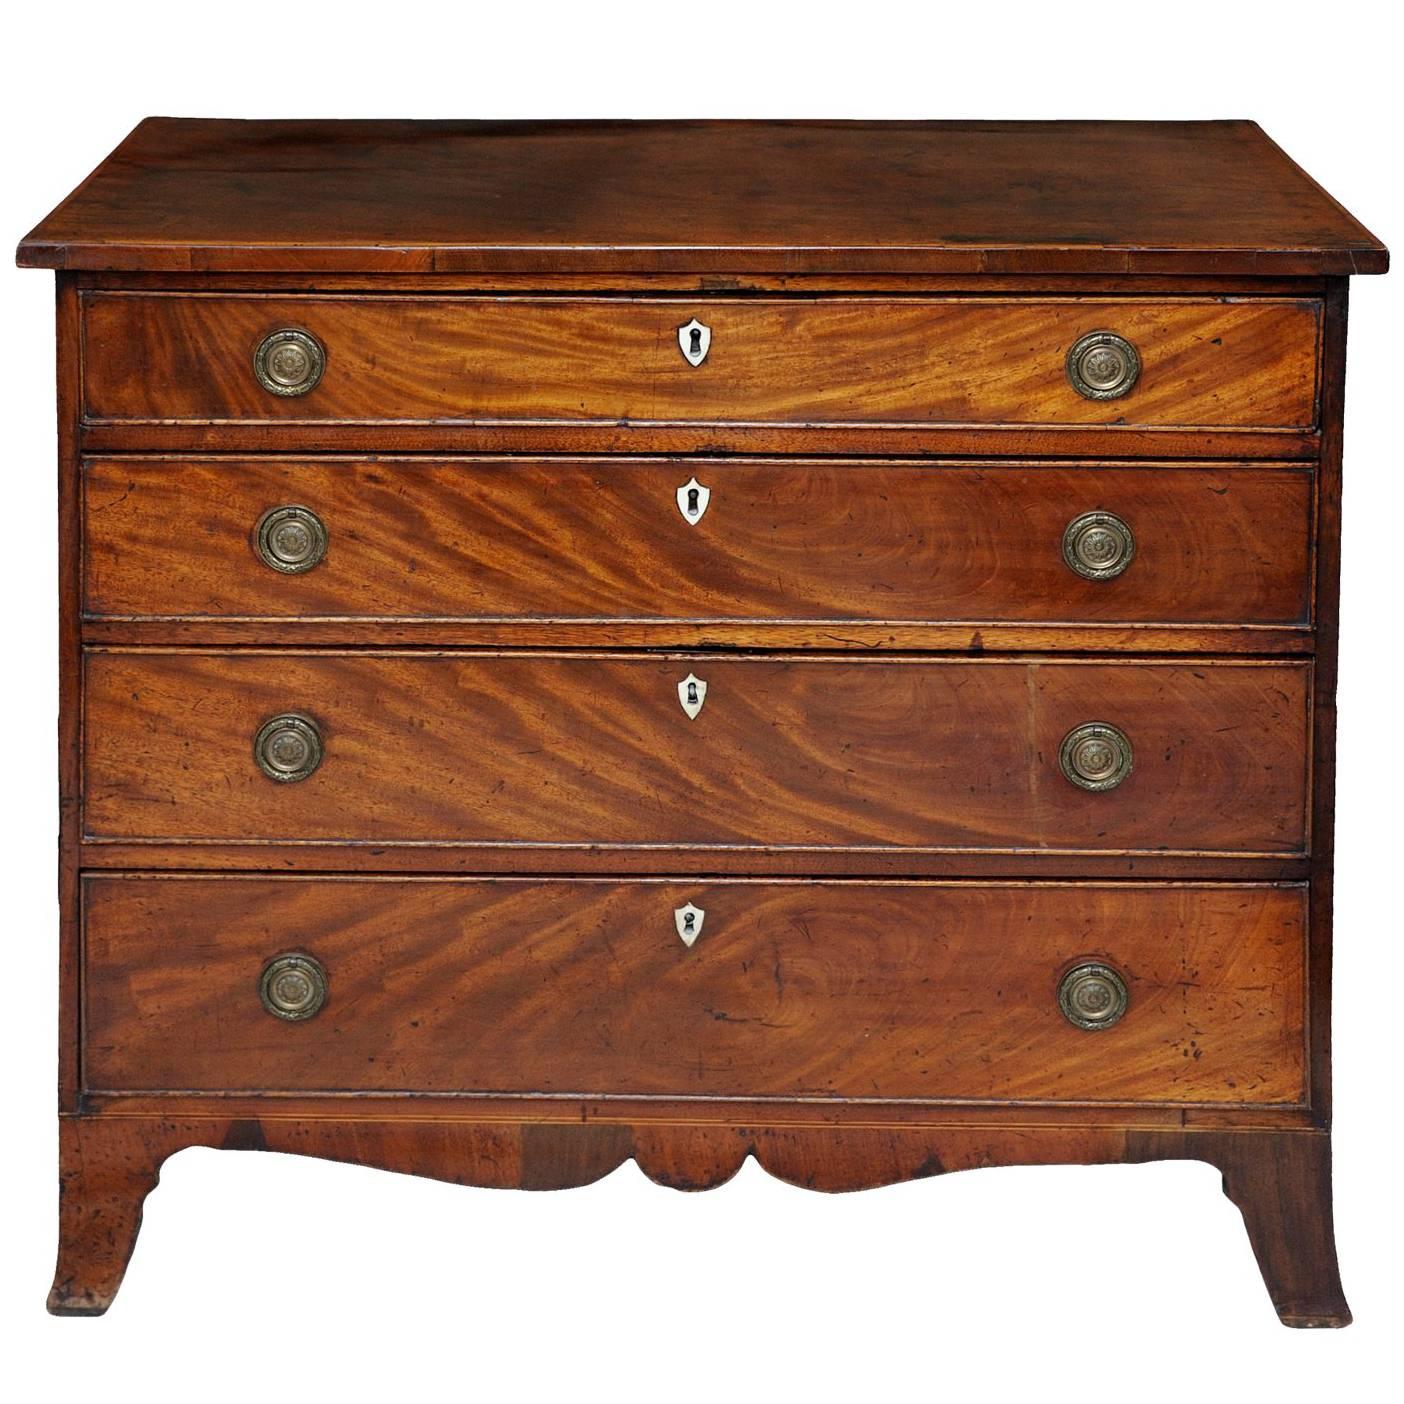 English Early 19th Century Regency Mahogany Chest of Drawers, circa 1810 For Sale